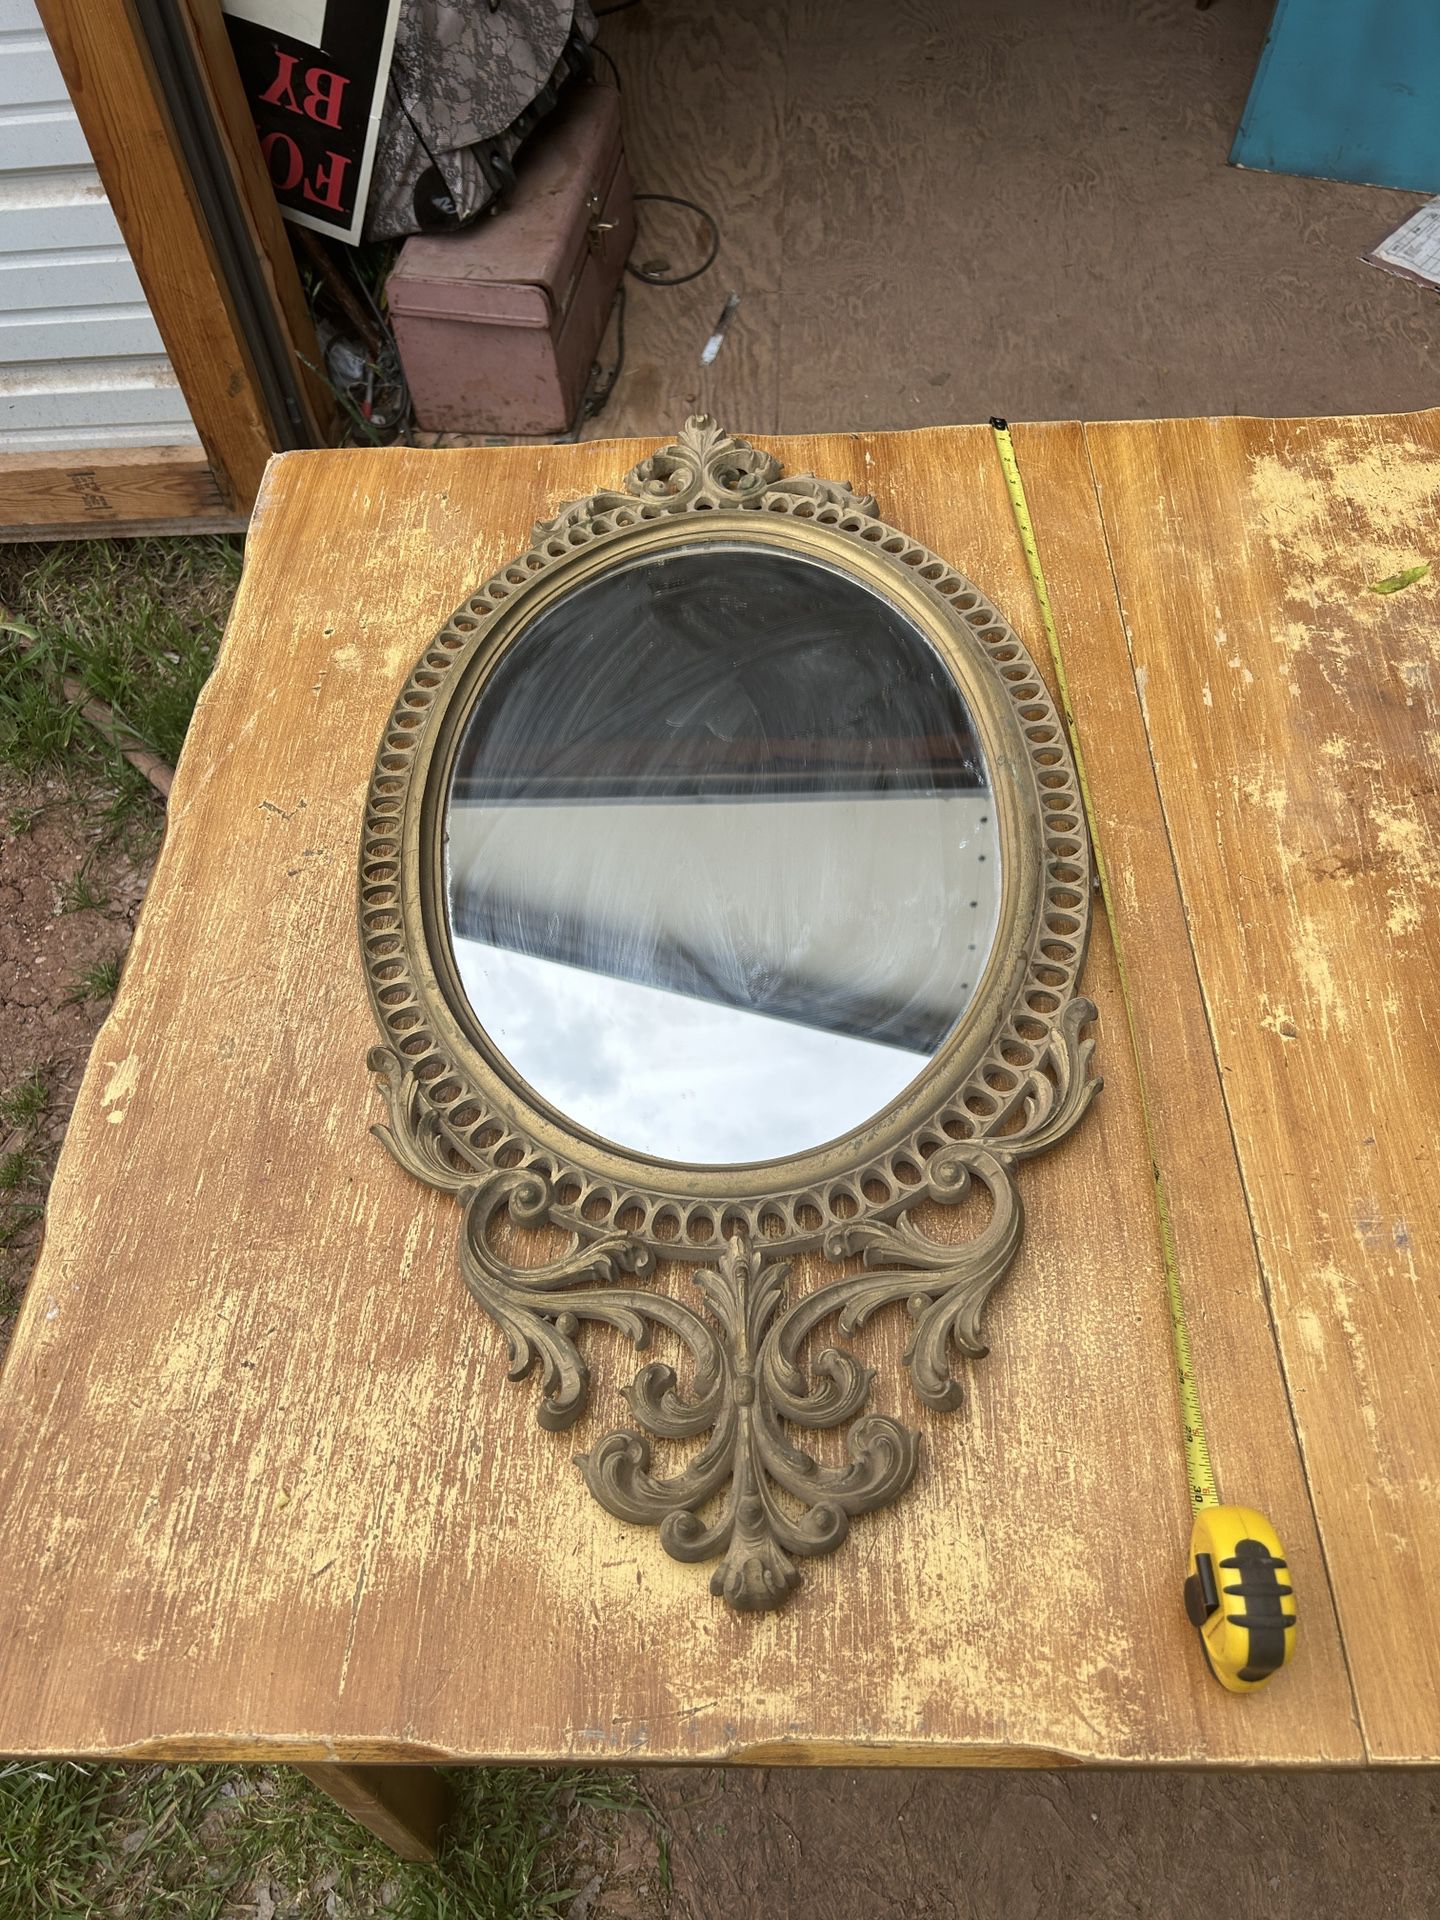 nice mirror iits 30 inches tall and 17 inches wide